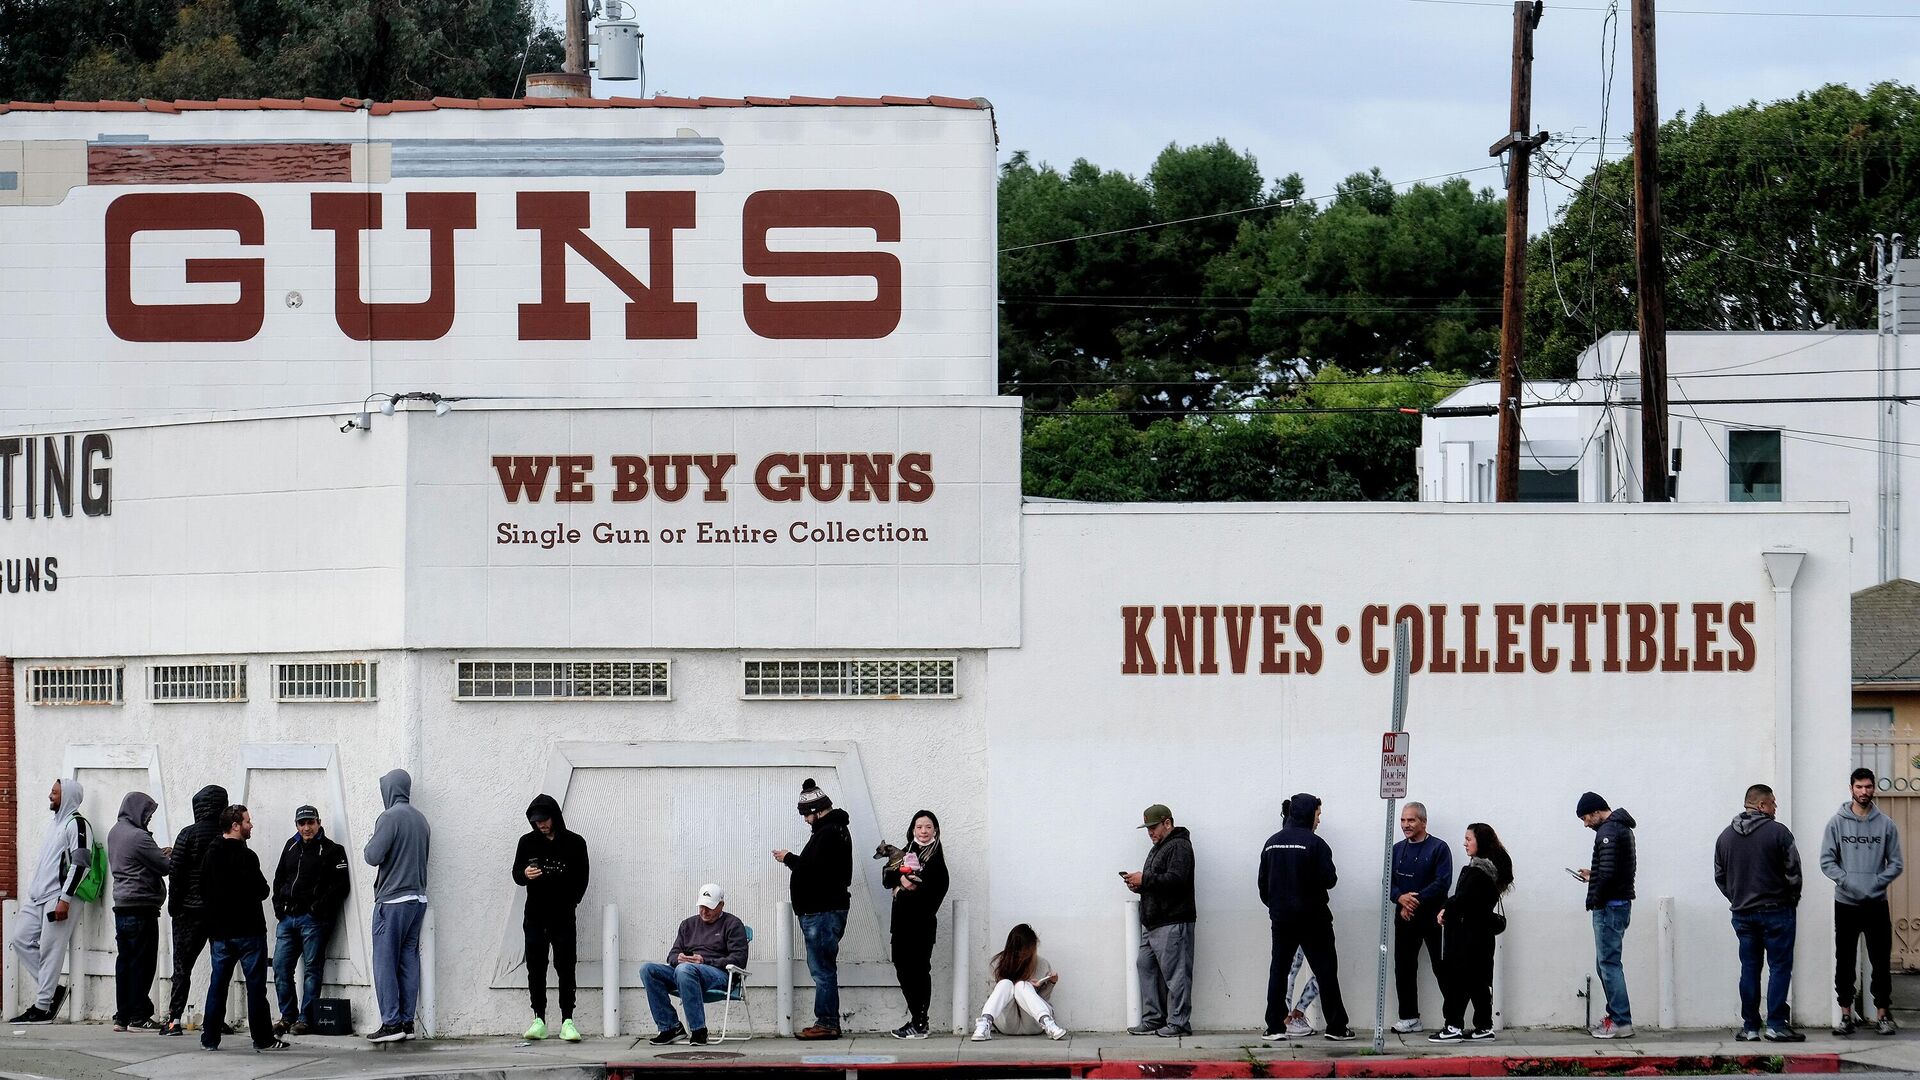 FILE - In this March 15, 2020 file photo people wait in a line to enter a gun store in Culver City, Calif. The man who shot and killed four people this week at a Tulsa, Okla., hospital bought his AR-style semiautomatic rifle just hours before he began the killing spree. That would not have been possible in Washington and a half dozen other states that have waiting periods of days or even more than a week before people can take possession of such weapons. (AP Photo/Ringo H.W. Chiu, File) - Sputnik International, 1920, 22.06.2022